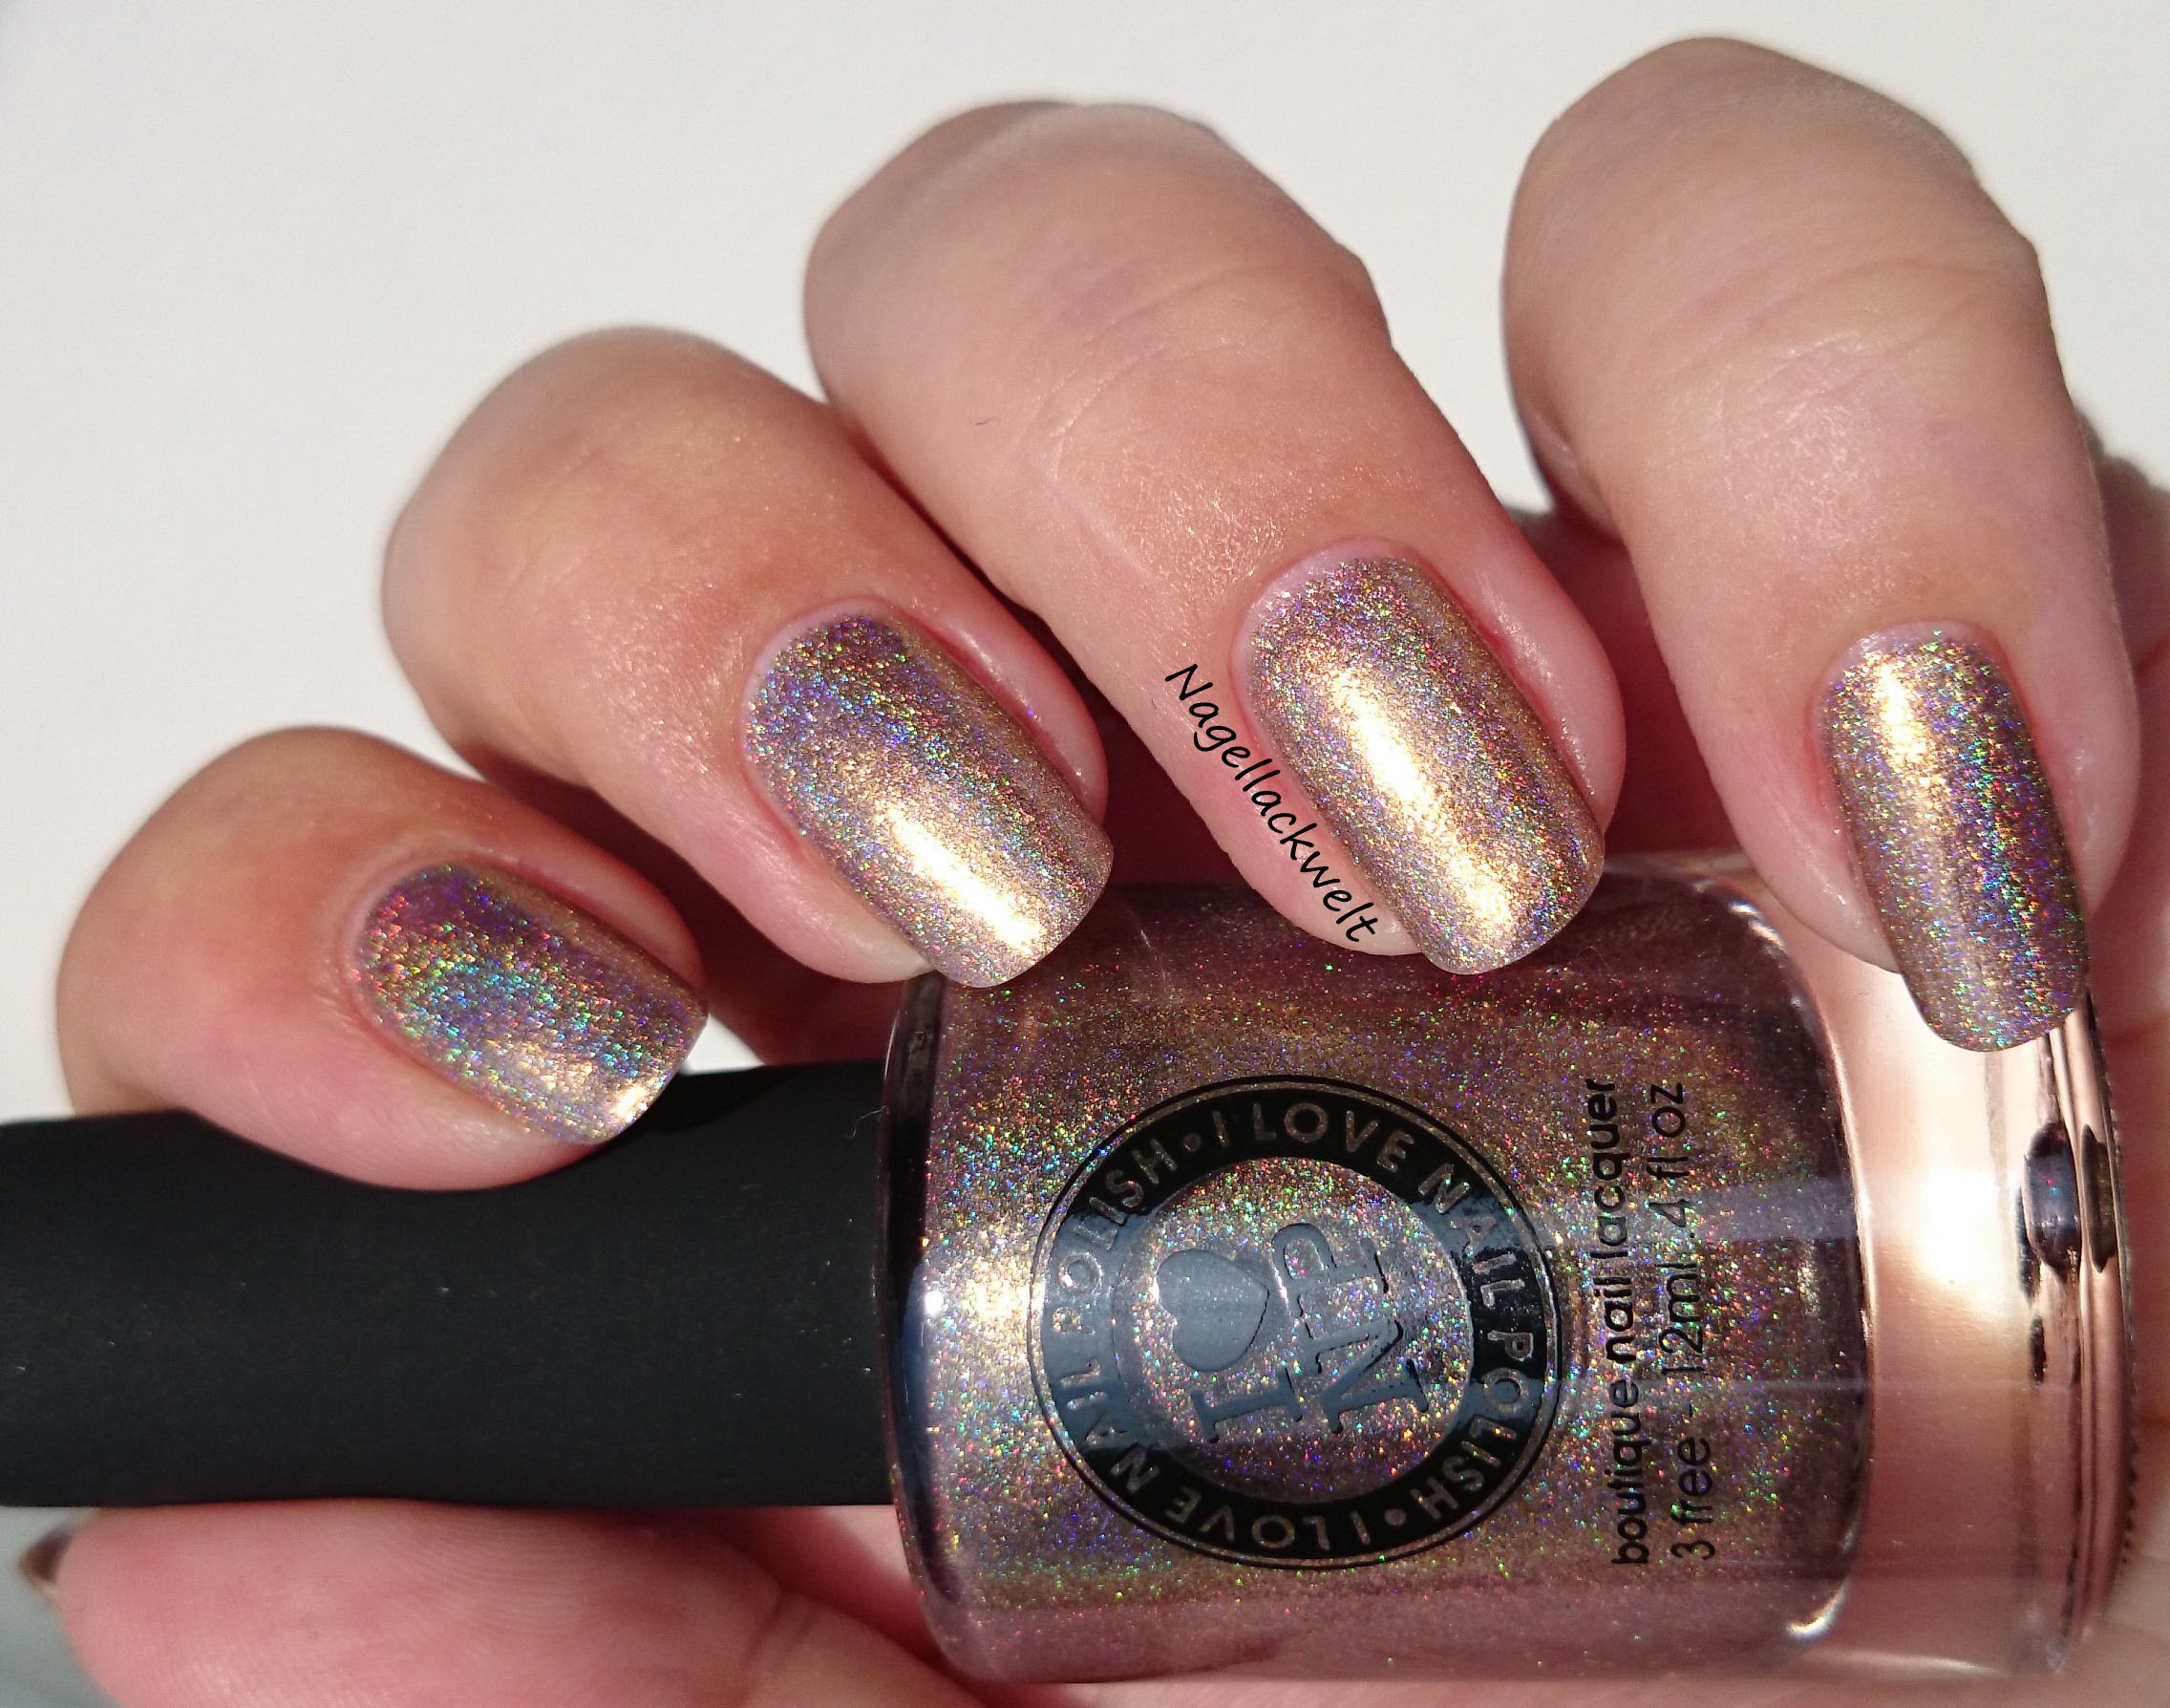 9. ILNP Color Changing Nail Polish - wide 4